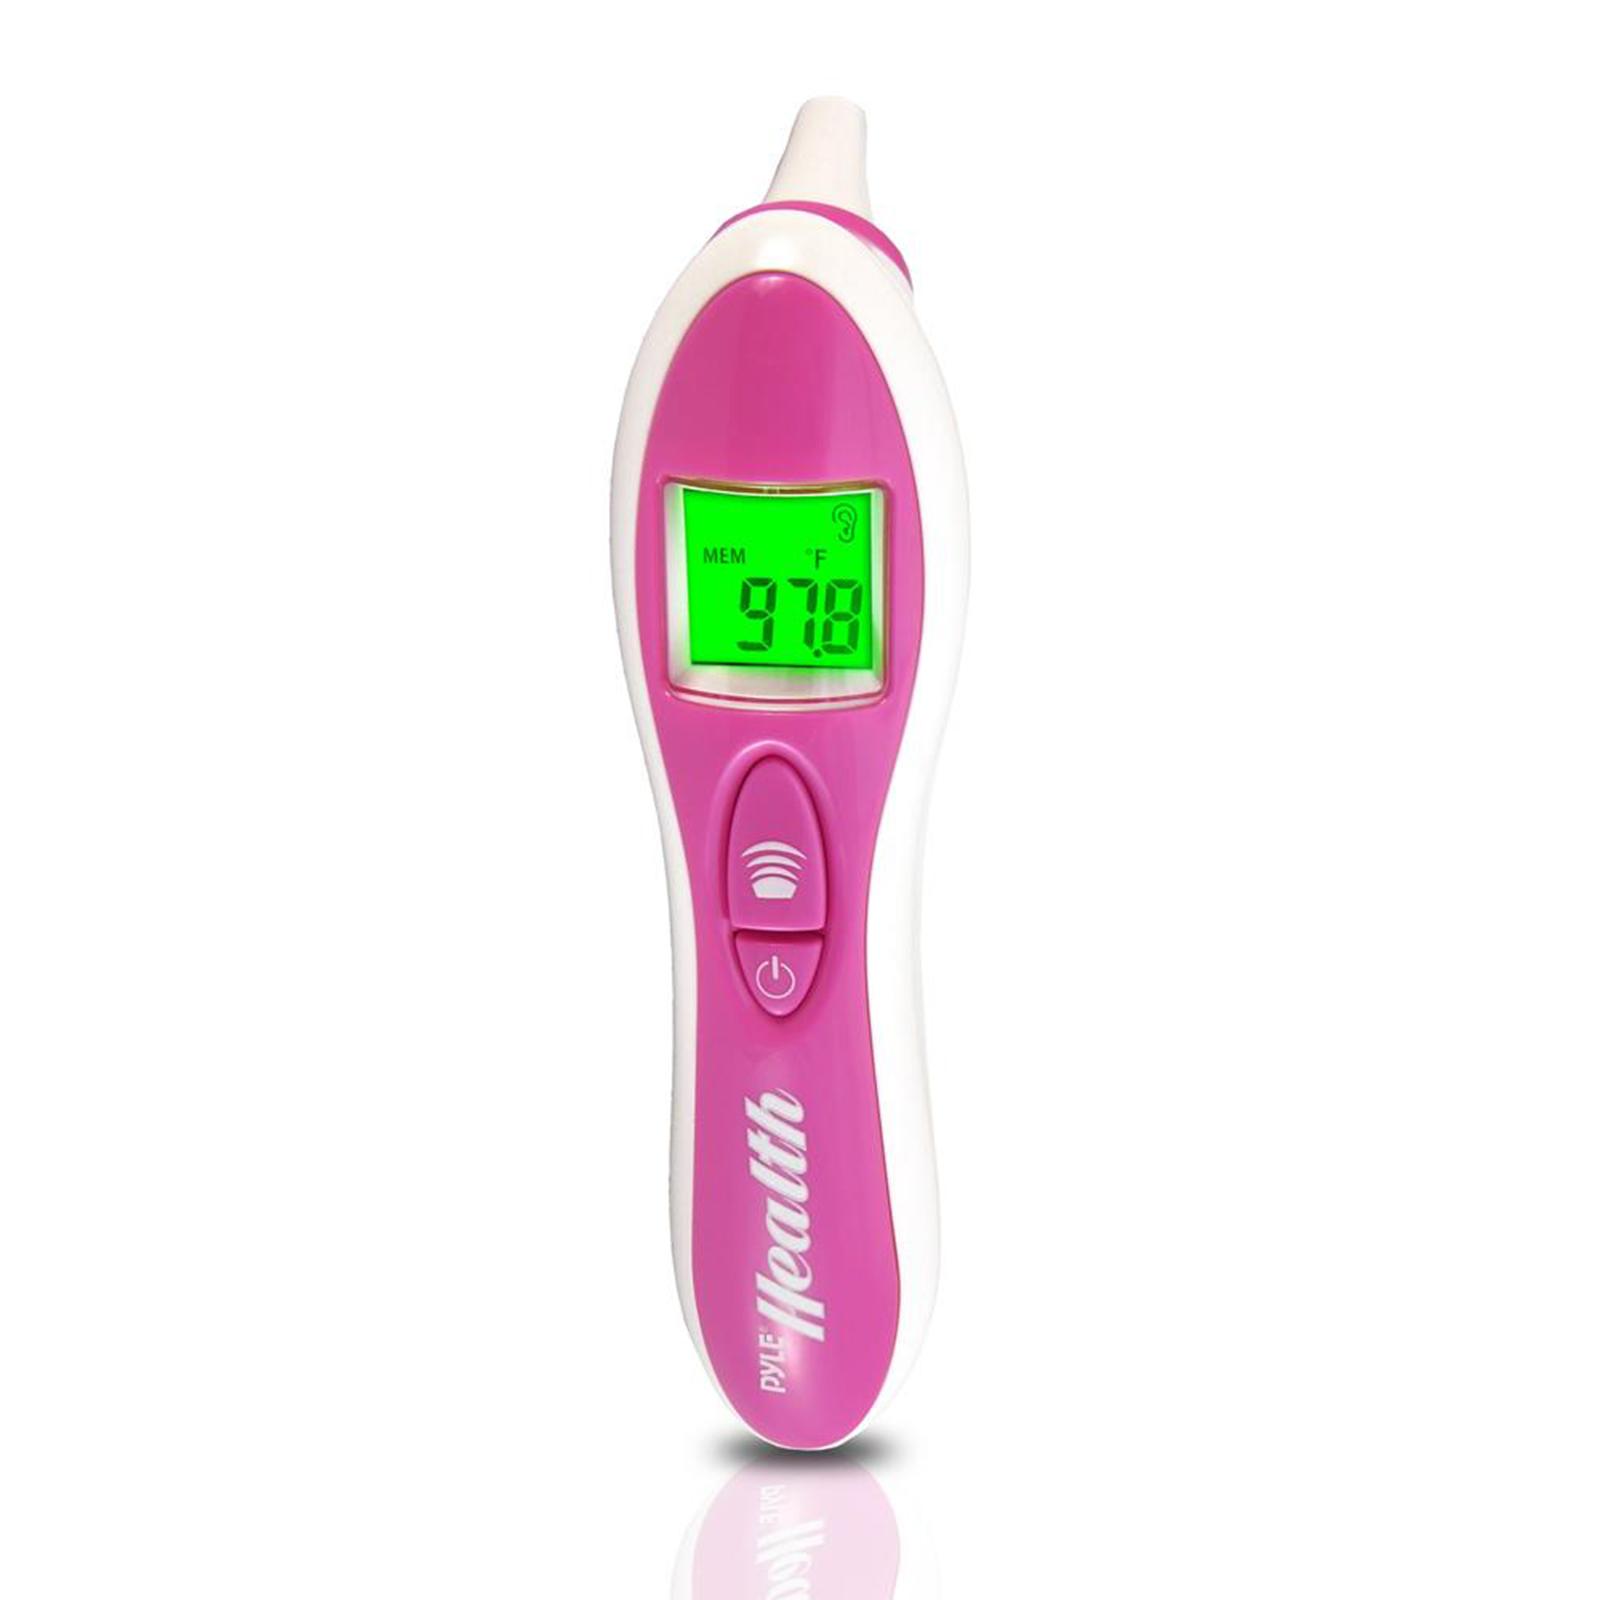 Pyle Digital Bluetooth Infrared Ear Thermometer with LCD Display